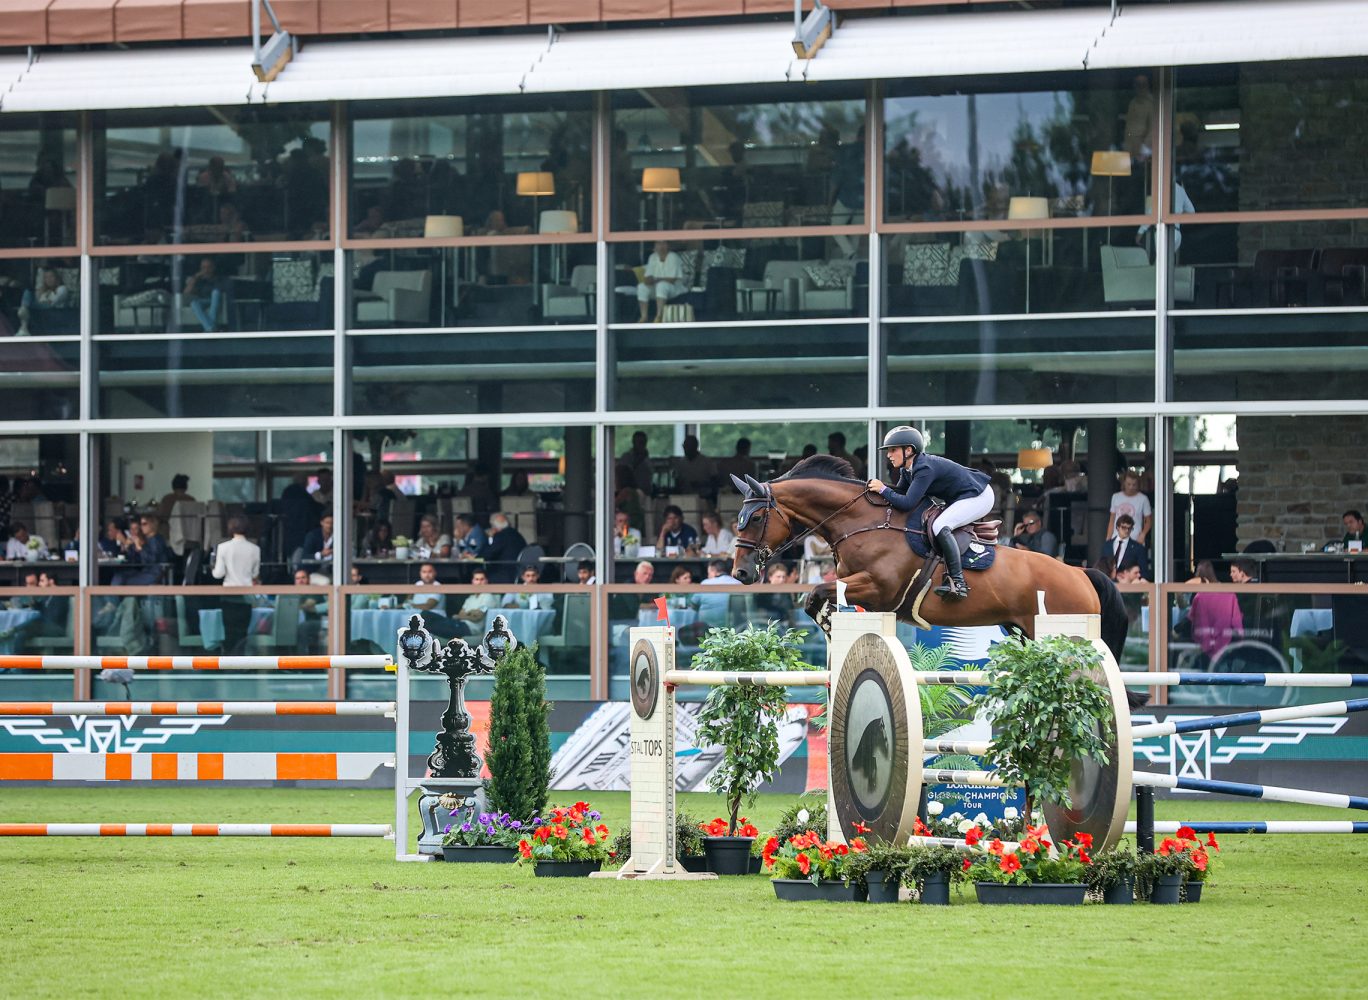 IRON DAMES EQUESTRIAN WELCOMES SANNE THIJSSEN AS SIXTH RIDER FOR GLOBAL CHAMPIONS LEAGUE